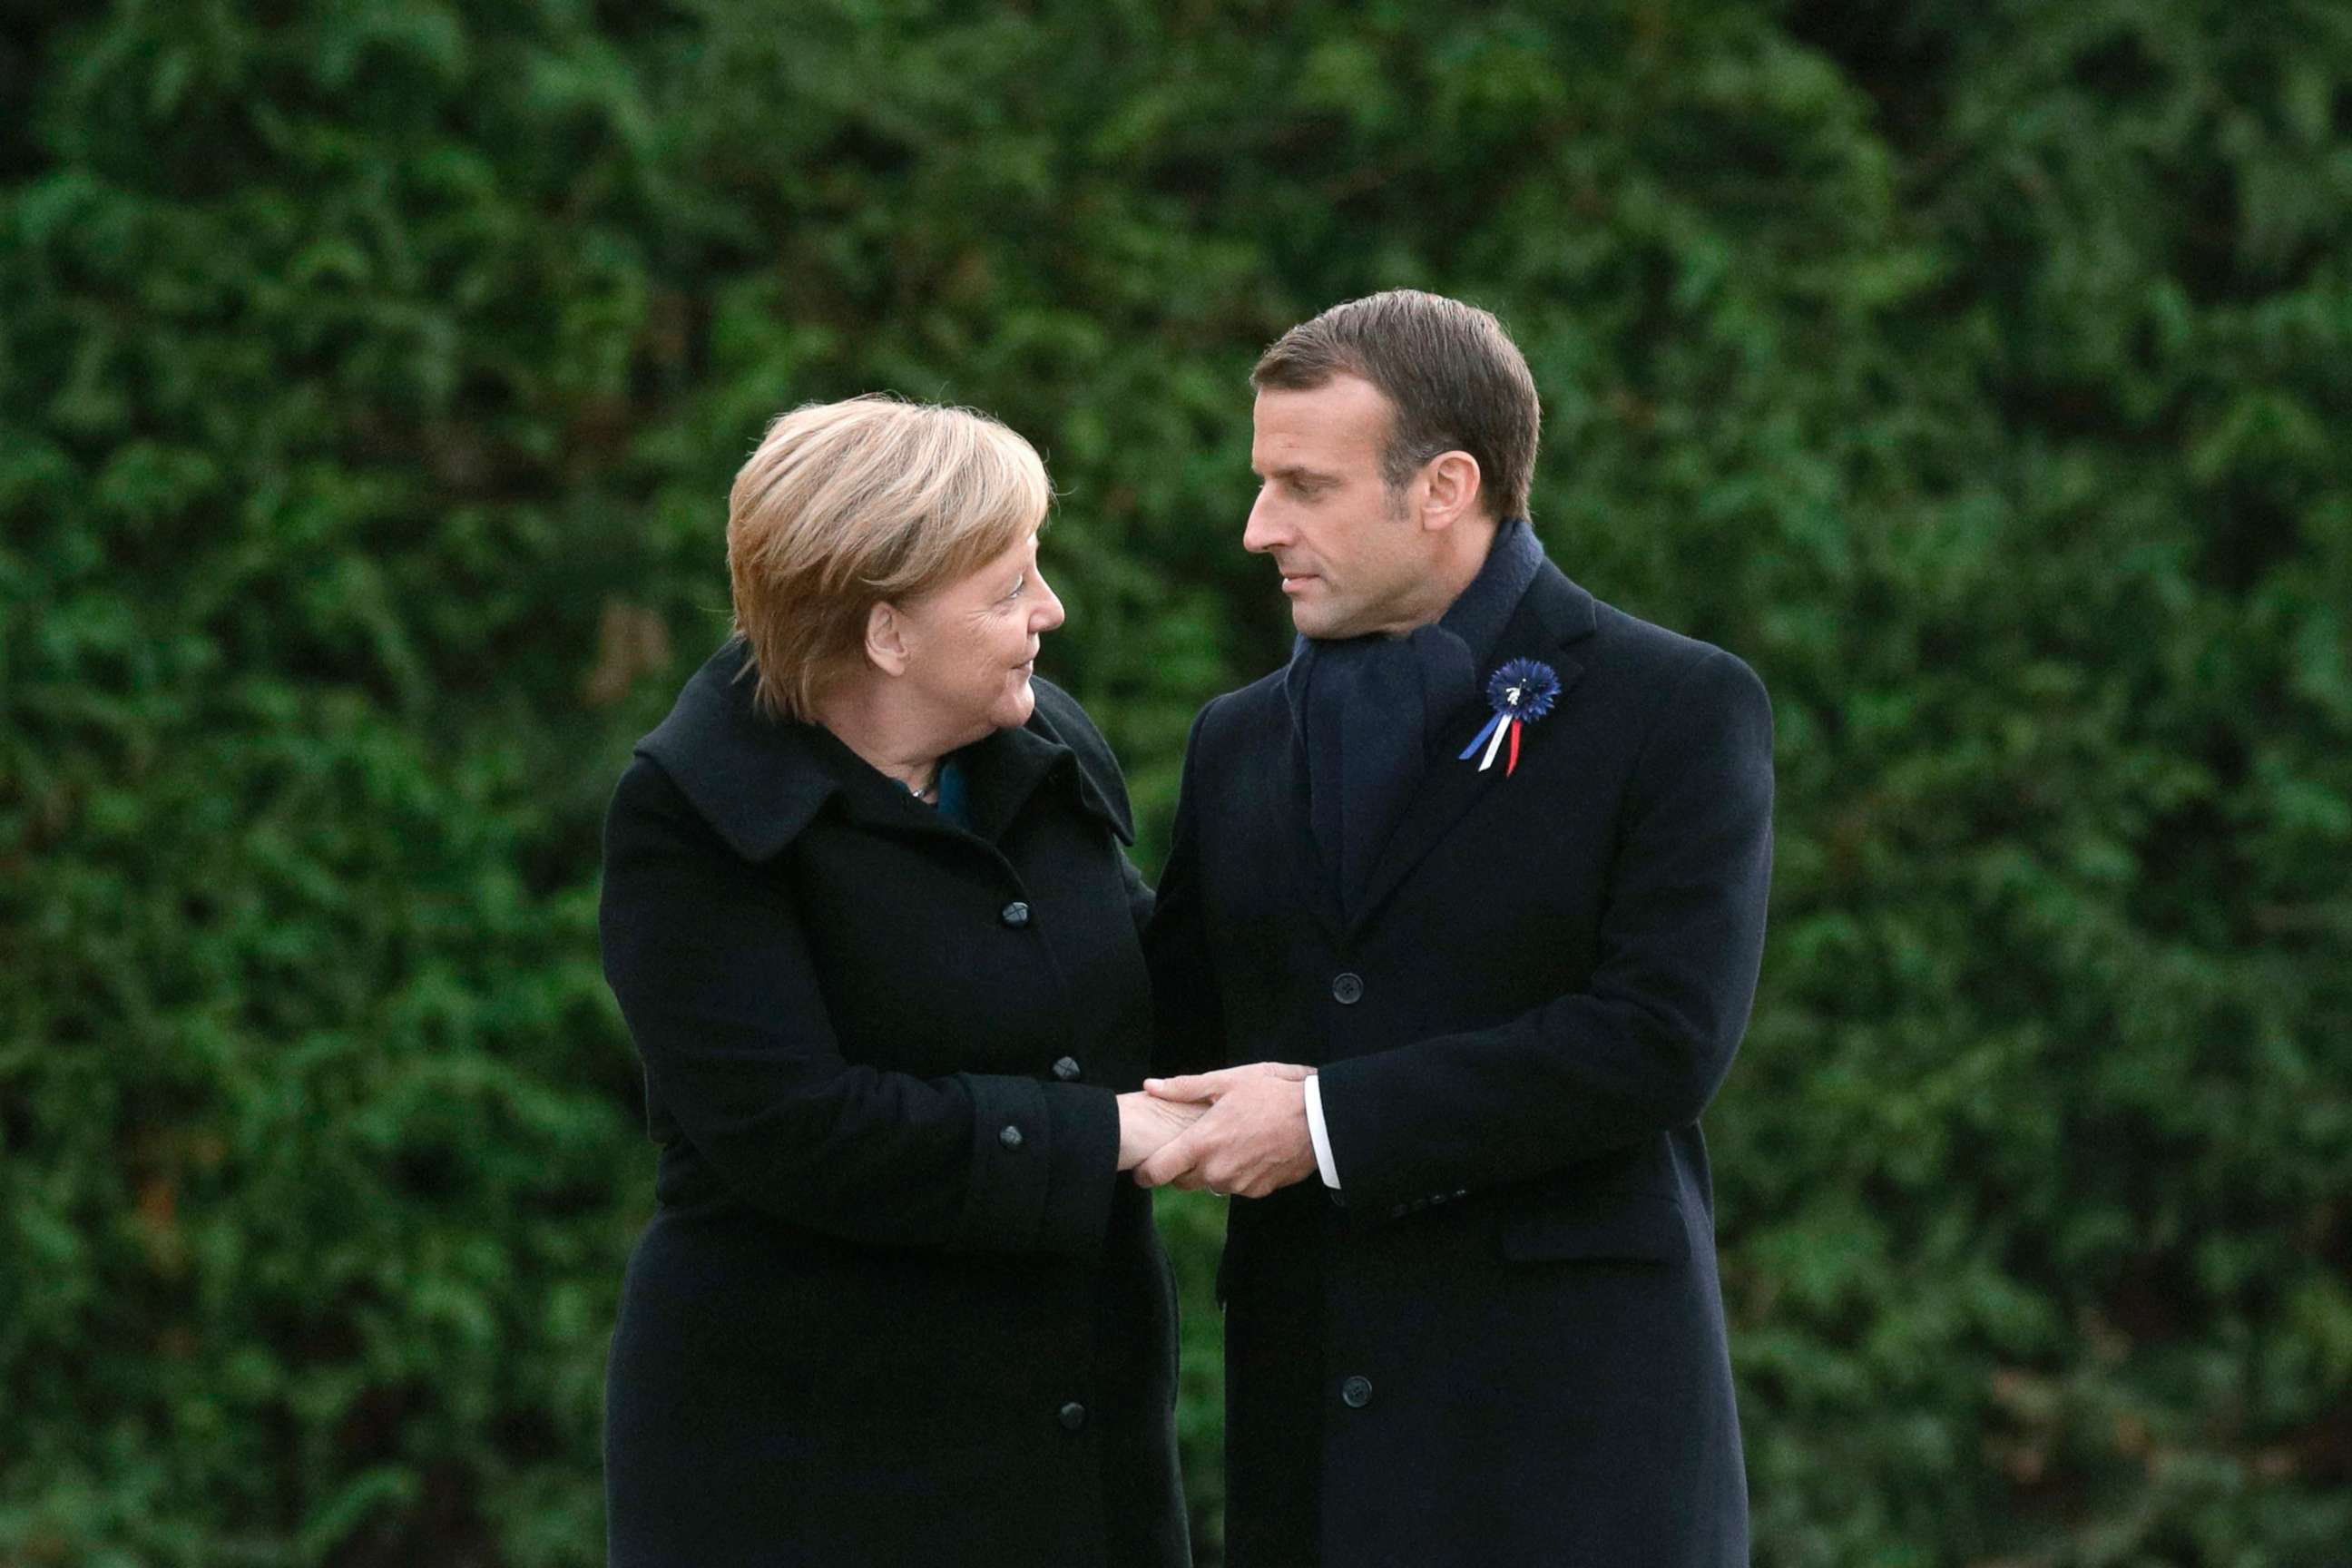 PHOTO: German Chancellor Angela Merkel and French President Emmanuel Macron hold hands after unveiling a plaque in a French-German ceremony in the clearing of Rethondes (the Glade of the Armistice) in Compiegne, northern France, Nov. 10, 2018.